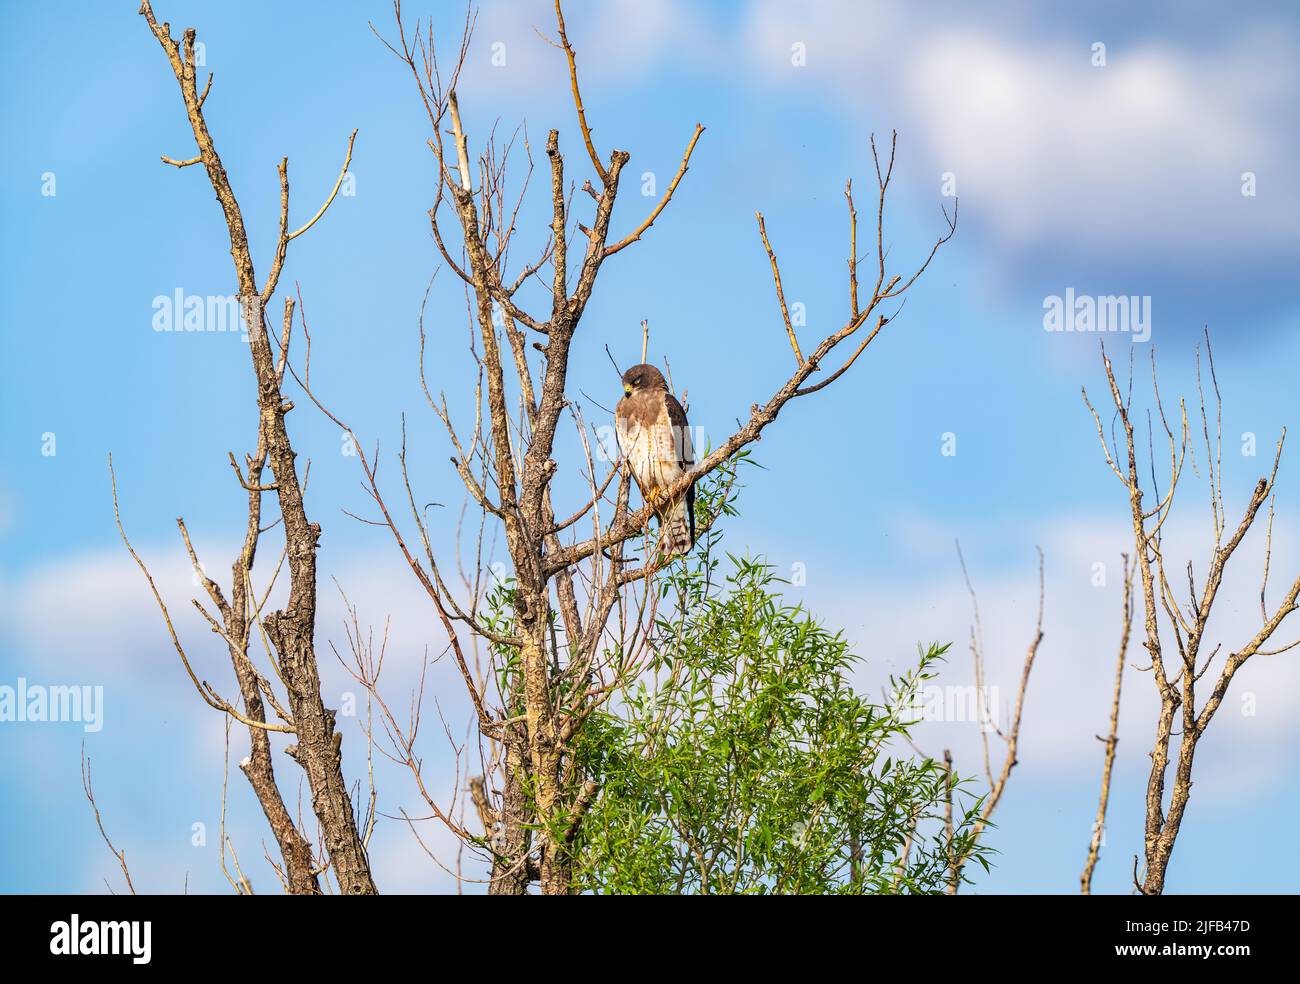 A Swainson's Hawk getting some shut eye while basking in the afternoon sunlight, in a beautiful peaceful setting of blue sky and fluffy white clouds. Stock Photo